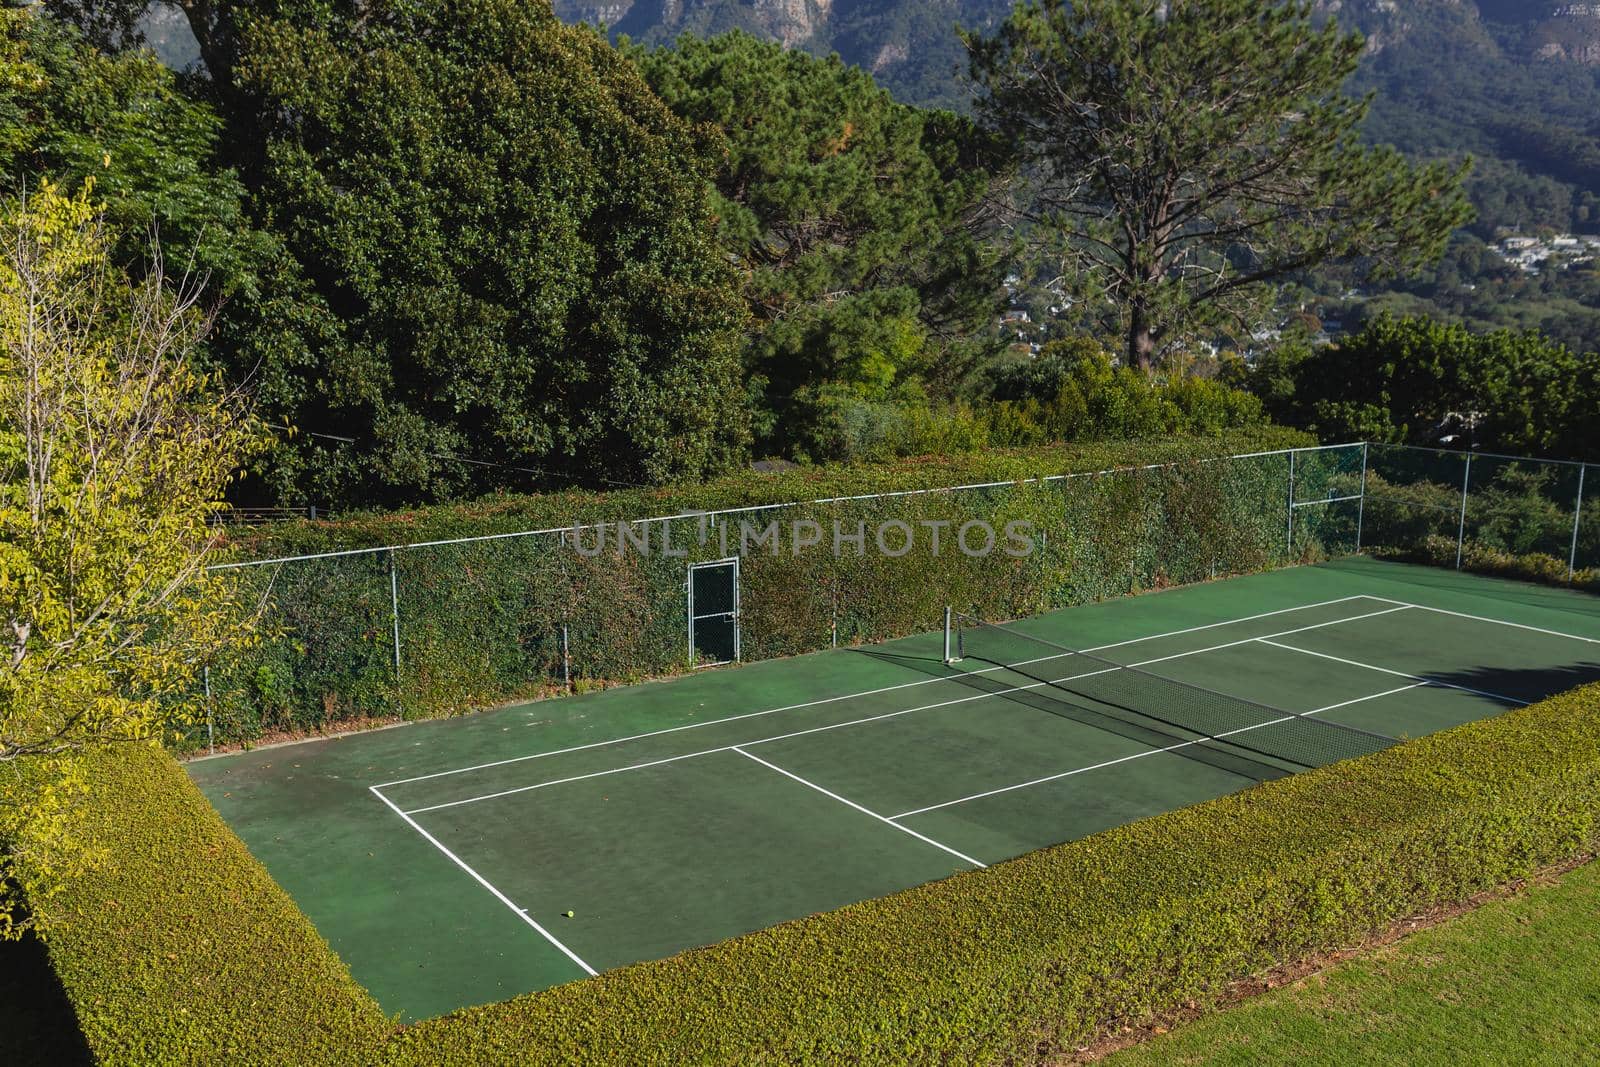 General view of tennis court in stunning countryside on sunny day by Wavebreakmedia